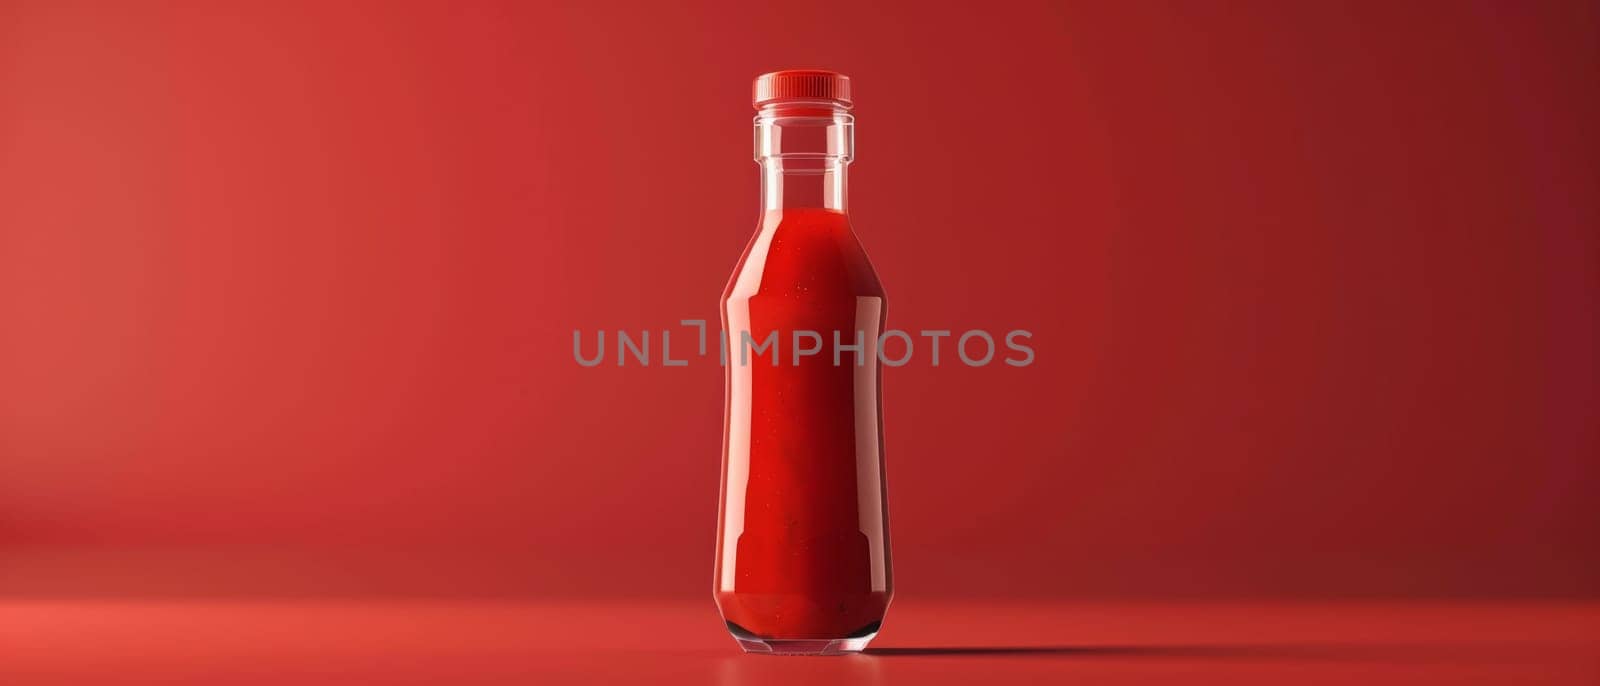 A single, sleek bottle filled with bright red ketchup stands against a vibrant red backdrop, emphasizing simplicity and cleanliness